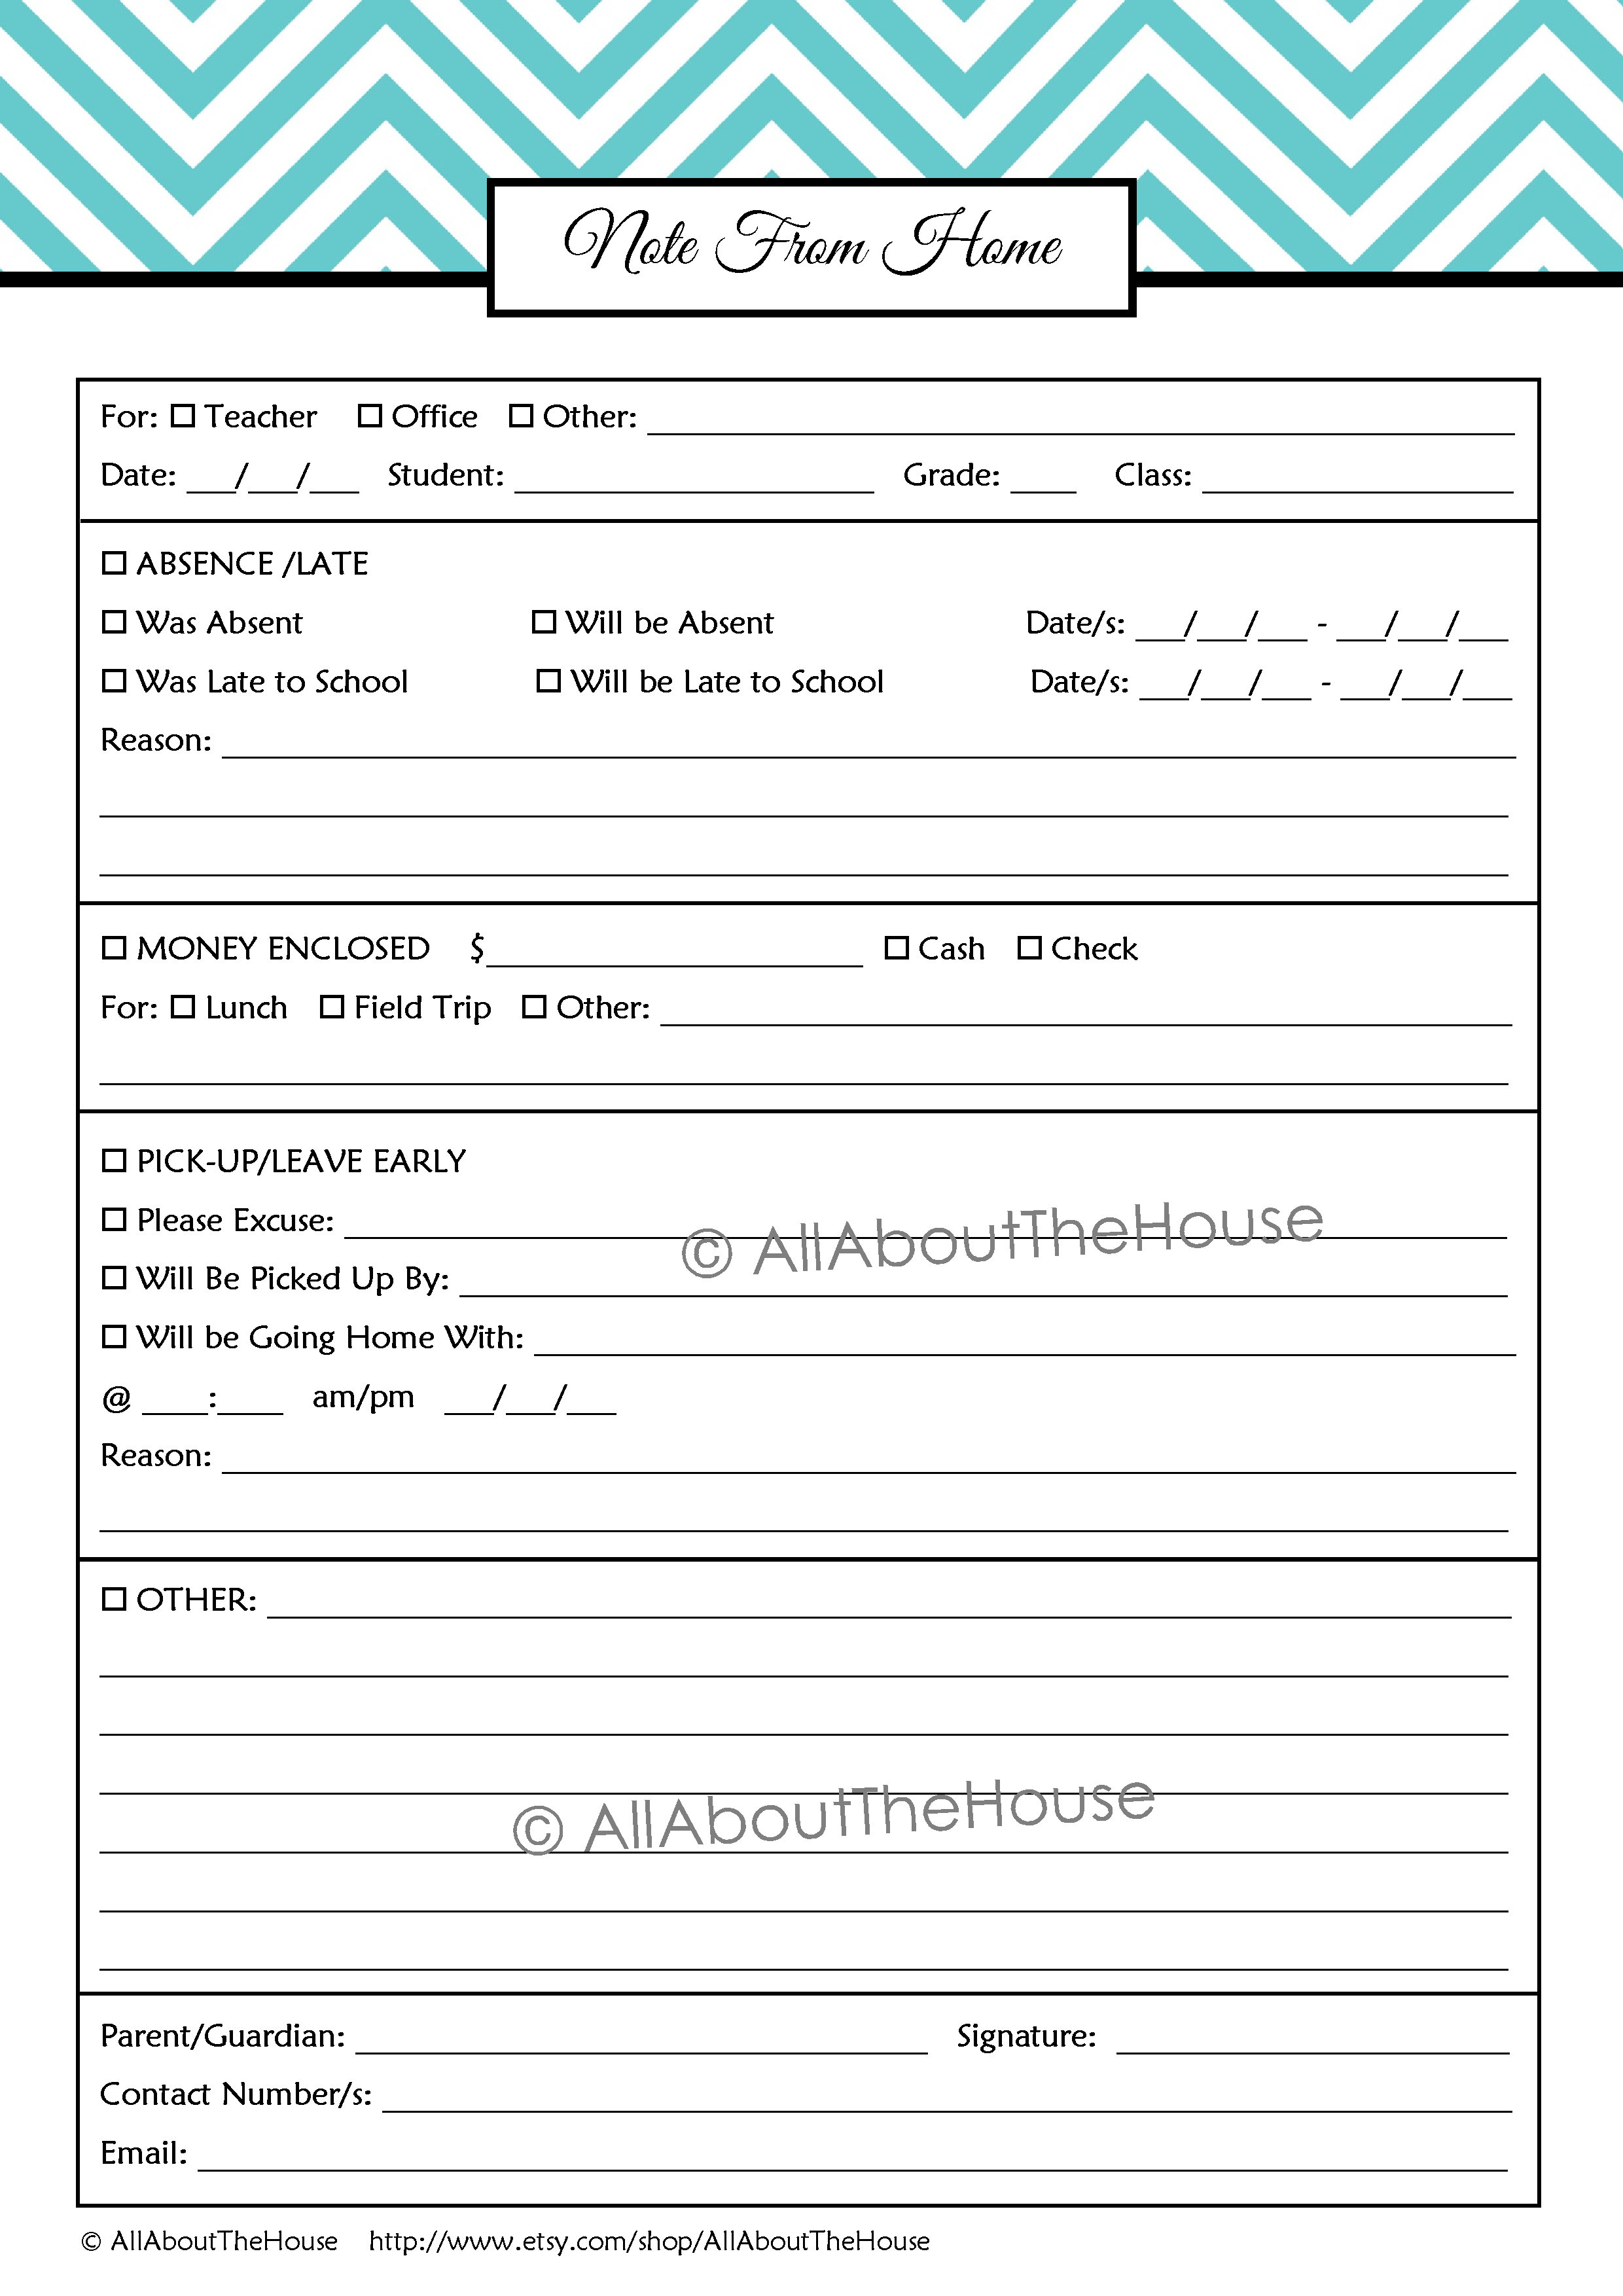 4-best-images-of-printable-note-for-meeting-sheets-teacher-meeting